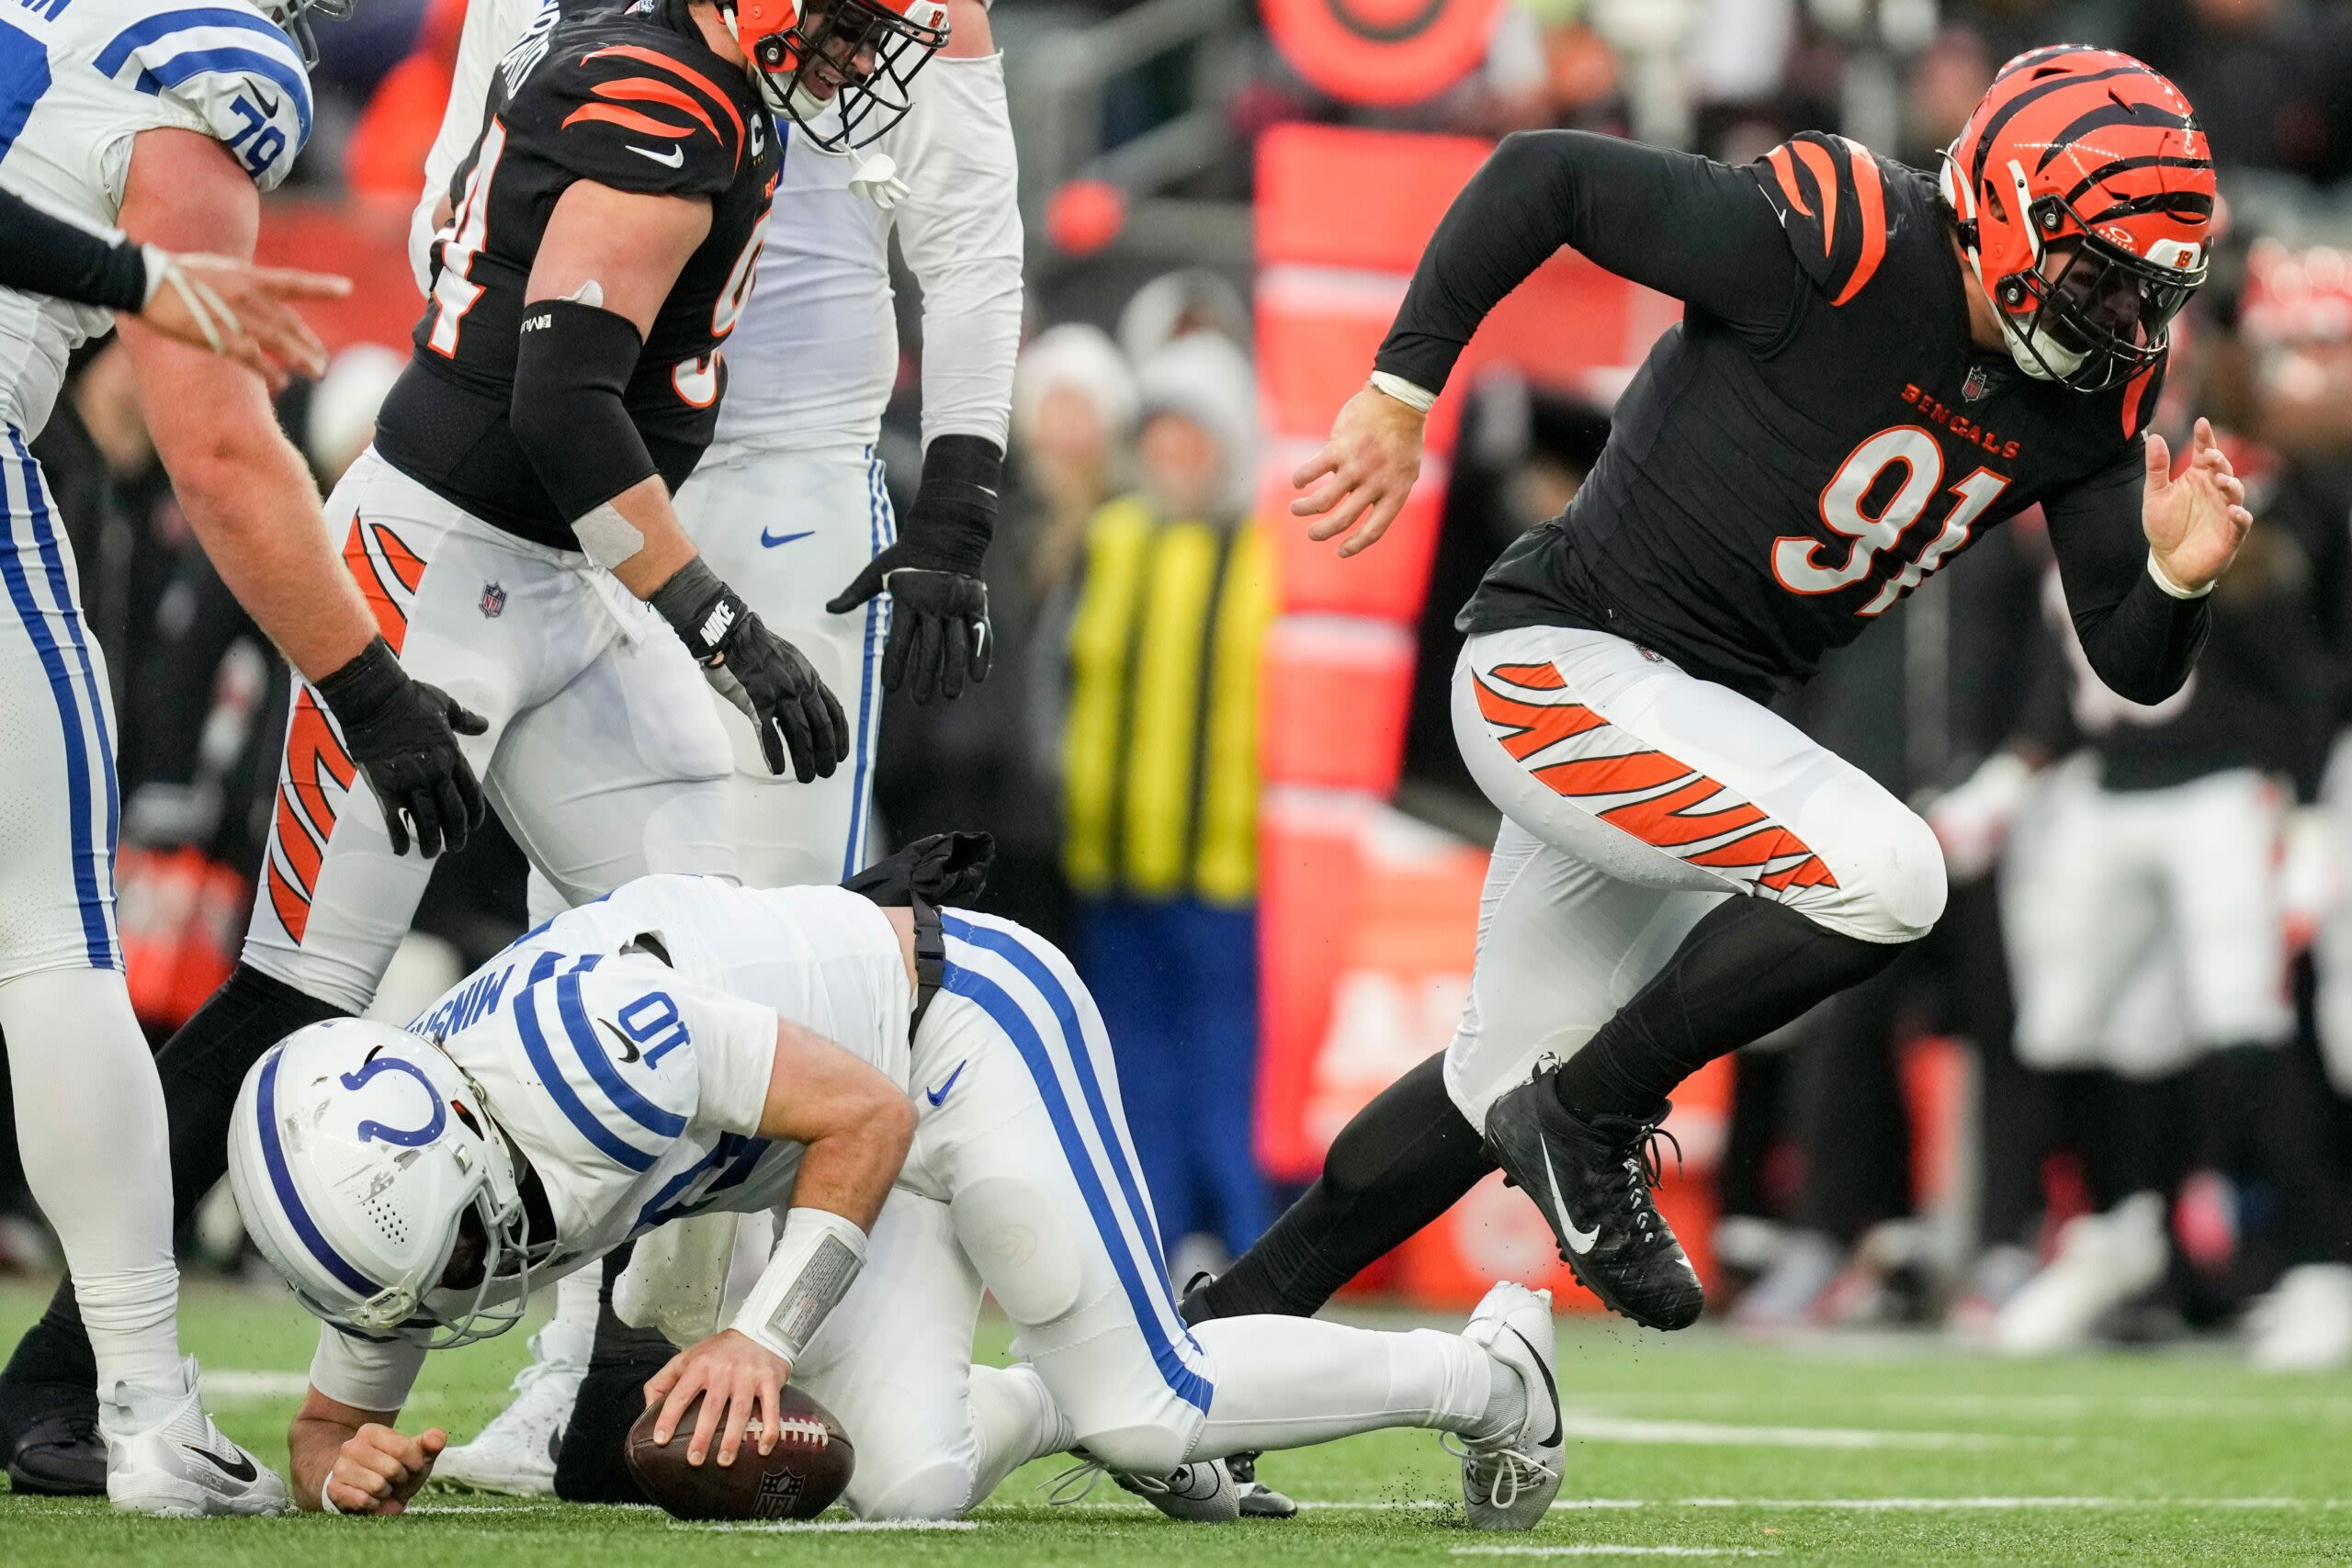 Bengals will have joint practice with Colts this summer